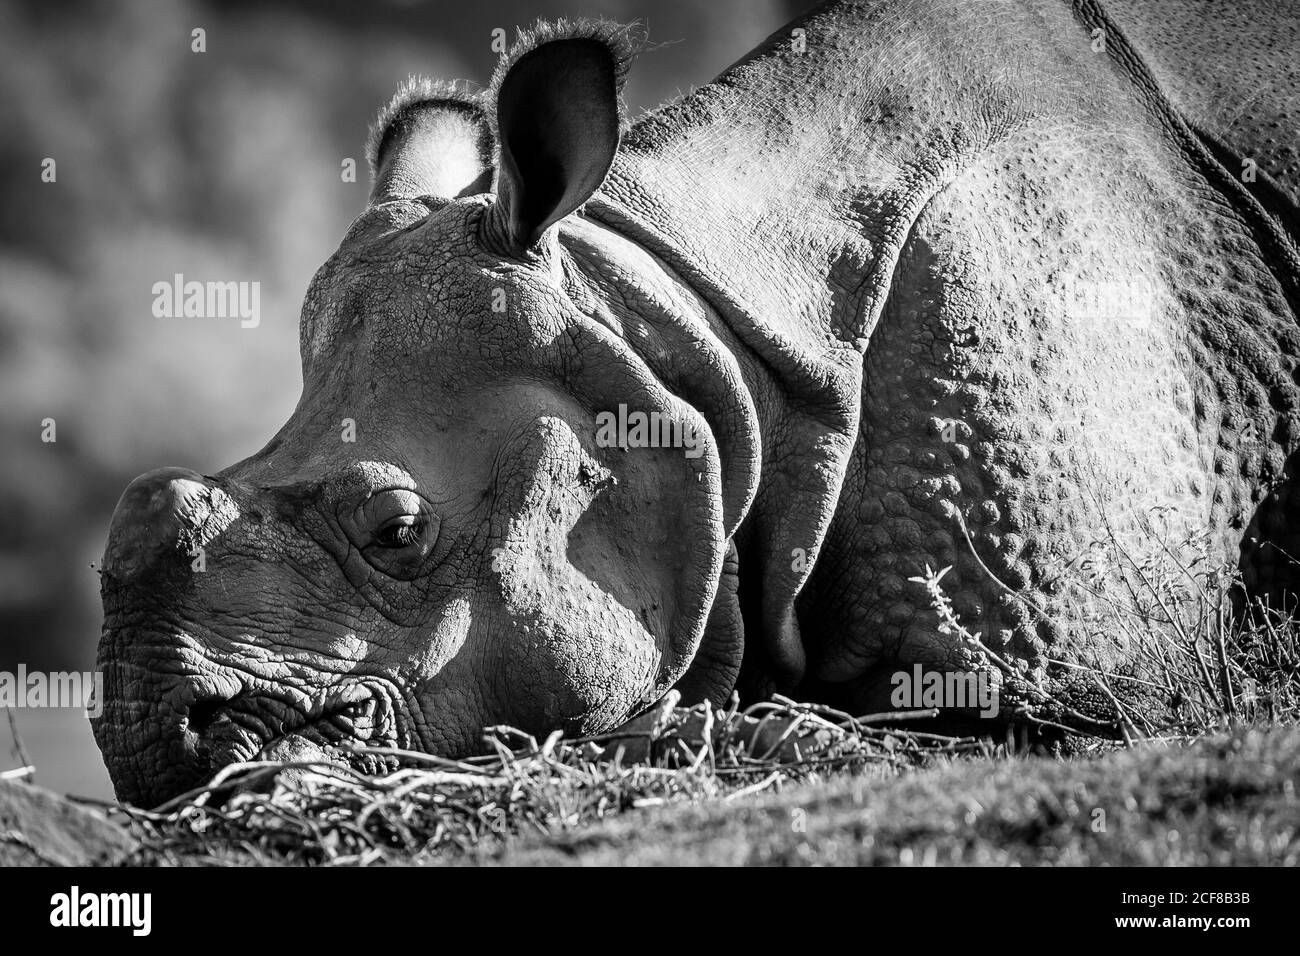 Black and white close up of a great one-horned Indian rhino (Rhinoceros unicornis) relaxing outdoors, West Midland Safari Park, UK. Stock Photo